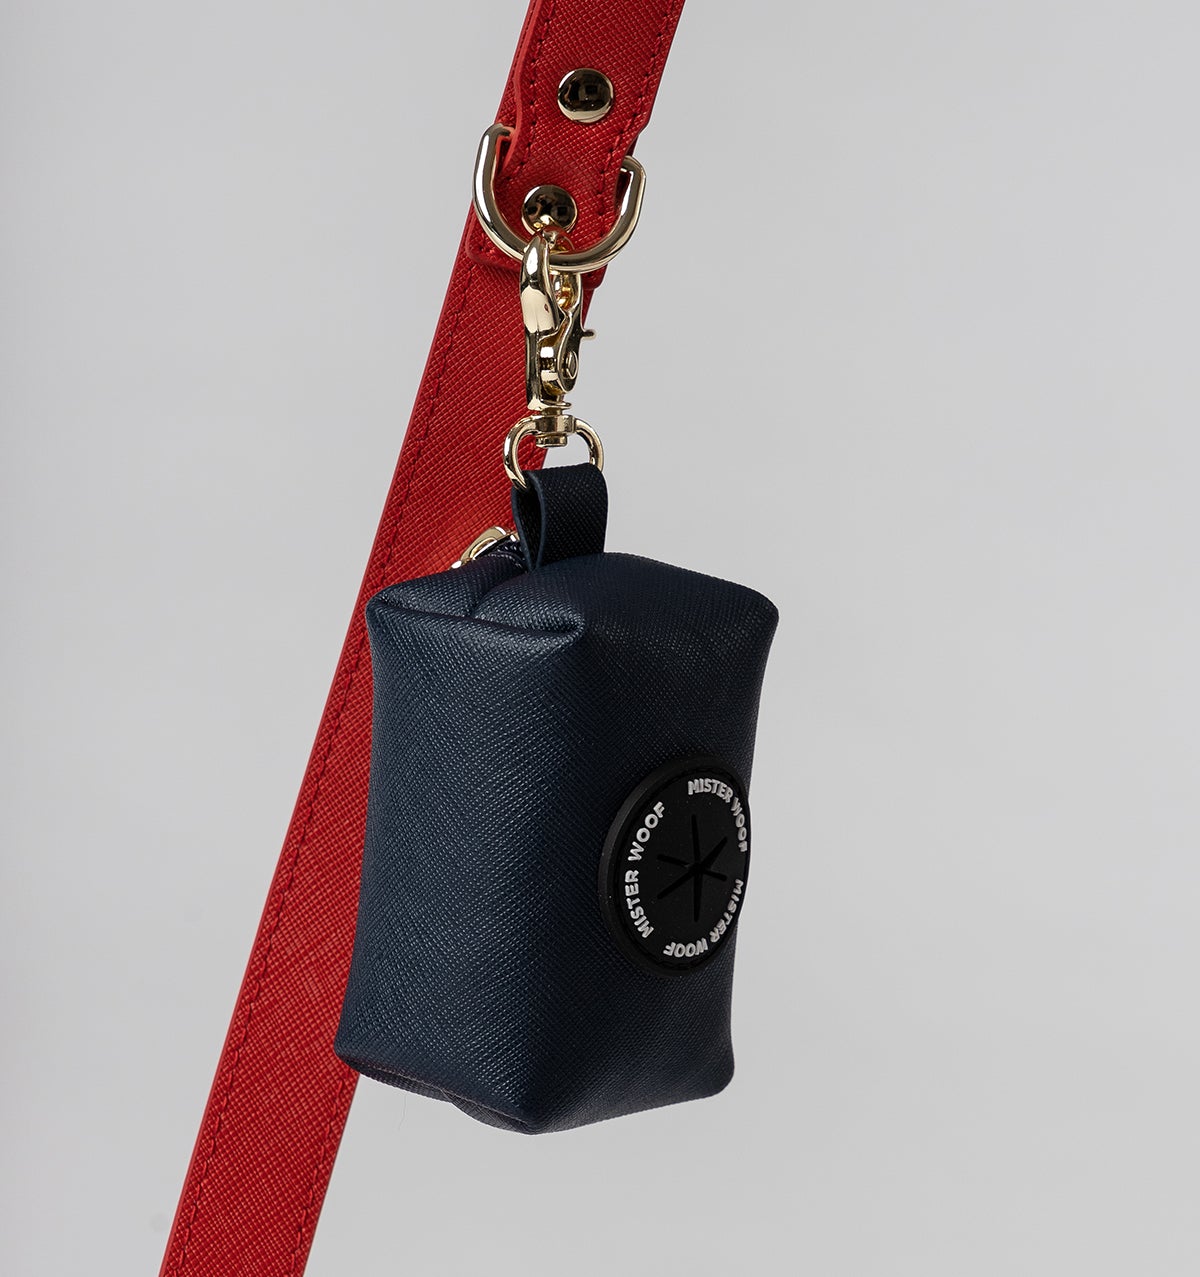 Mister Woof's bold Red Leather Standard Dog Lead perfectly compliment their Royal Navy Leather Poop Bag Holder. Mr Woof's Saffiano leather is water resistant and is perfect for walking in the rain.